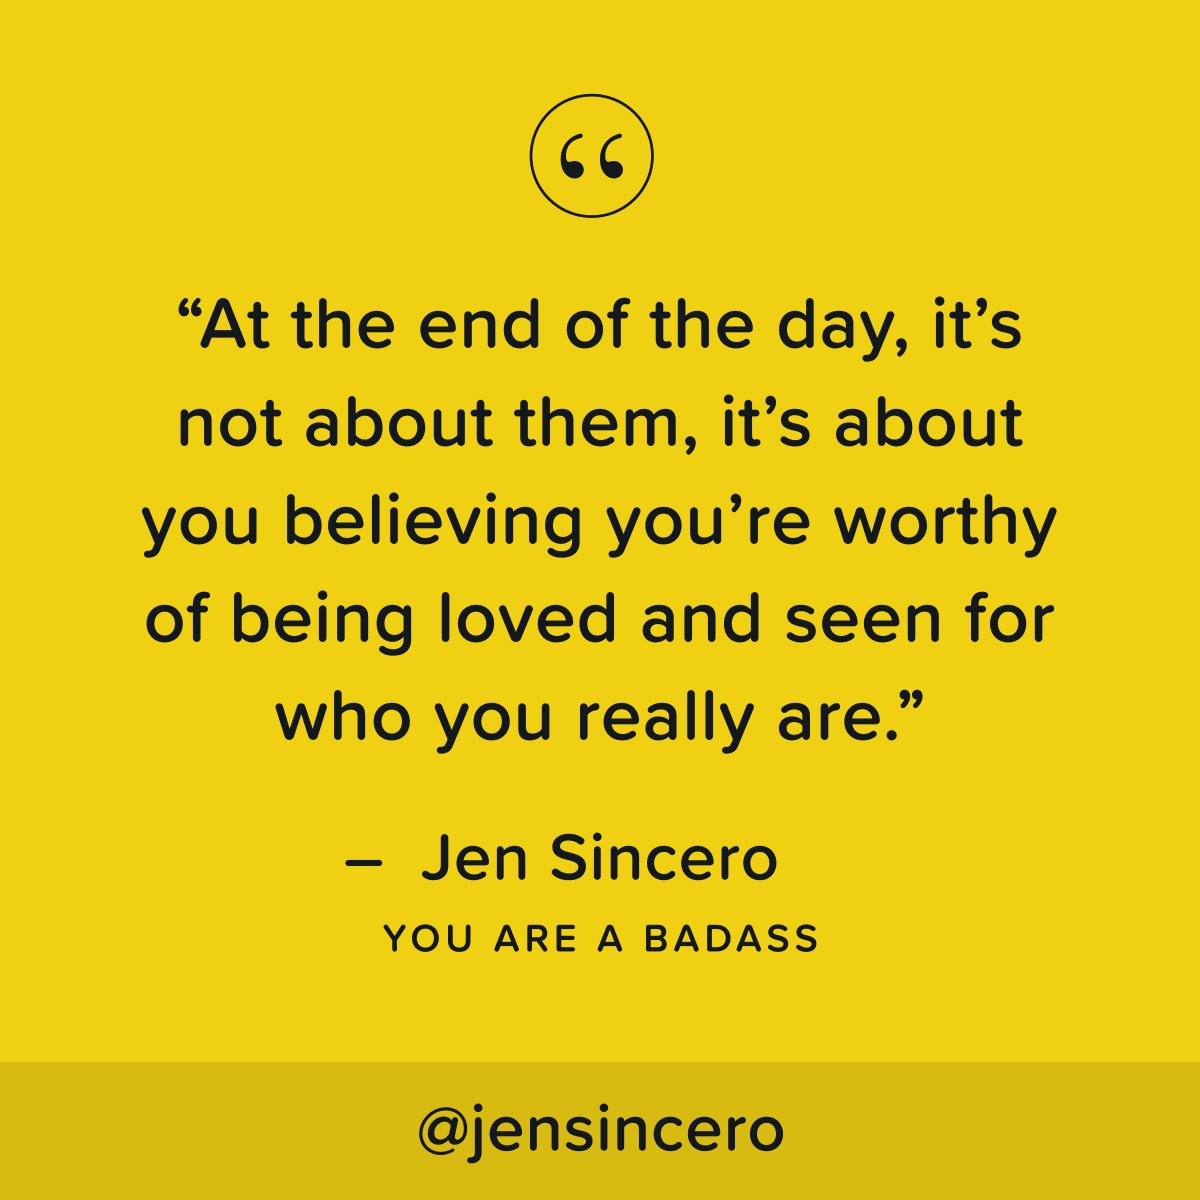 Don't let yourself down in favor of supporting the bad behavior of others. It's about respecting yourself, instead of catering to your insecure need to be liked. #youareabadass #QOTD #TuesdayThoughts #TuesdayMotivation